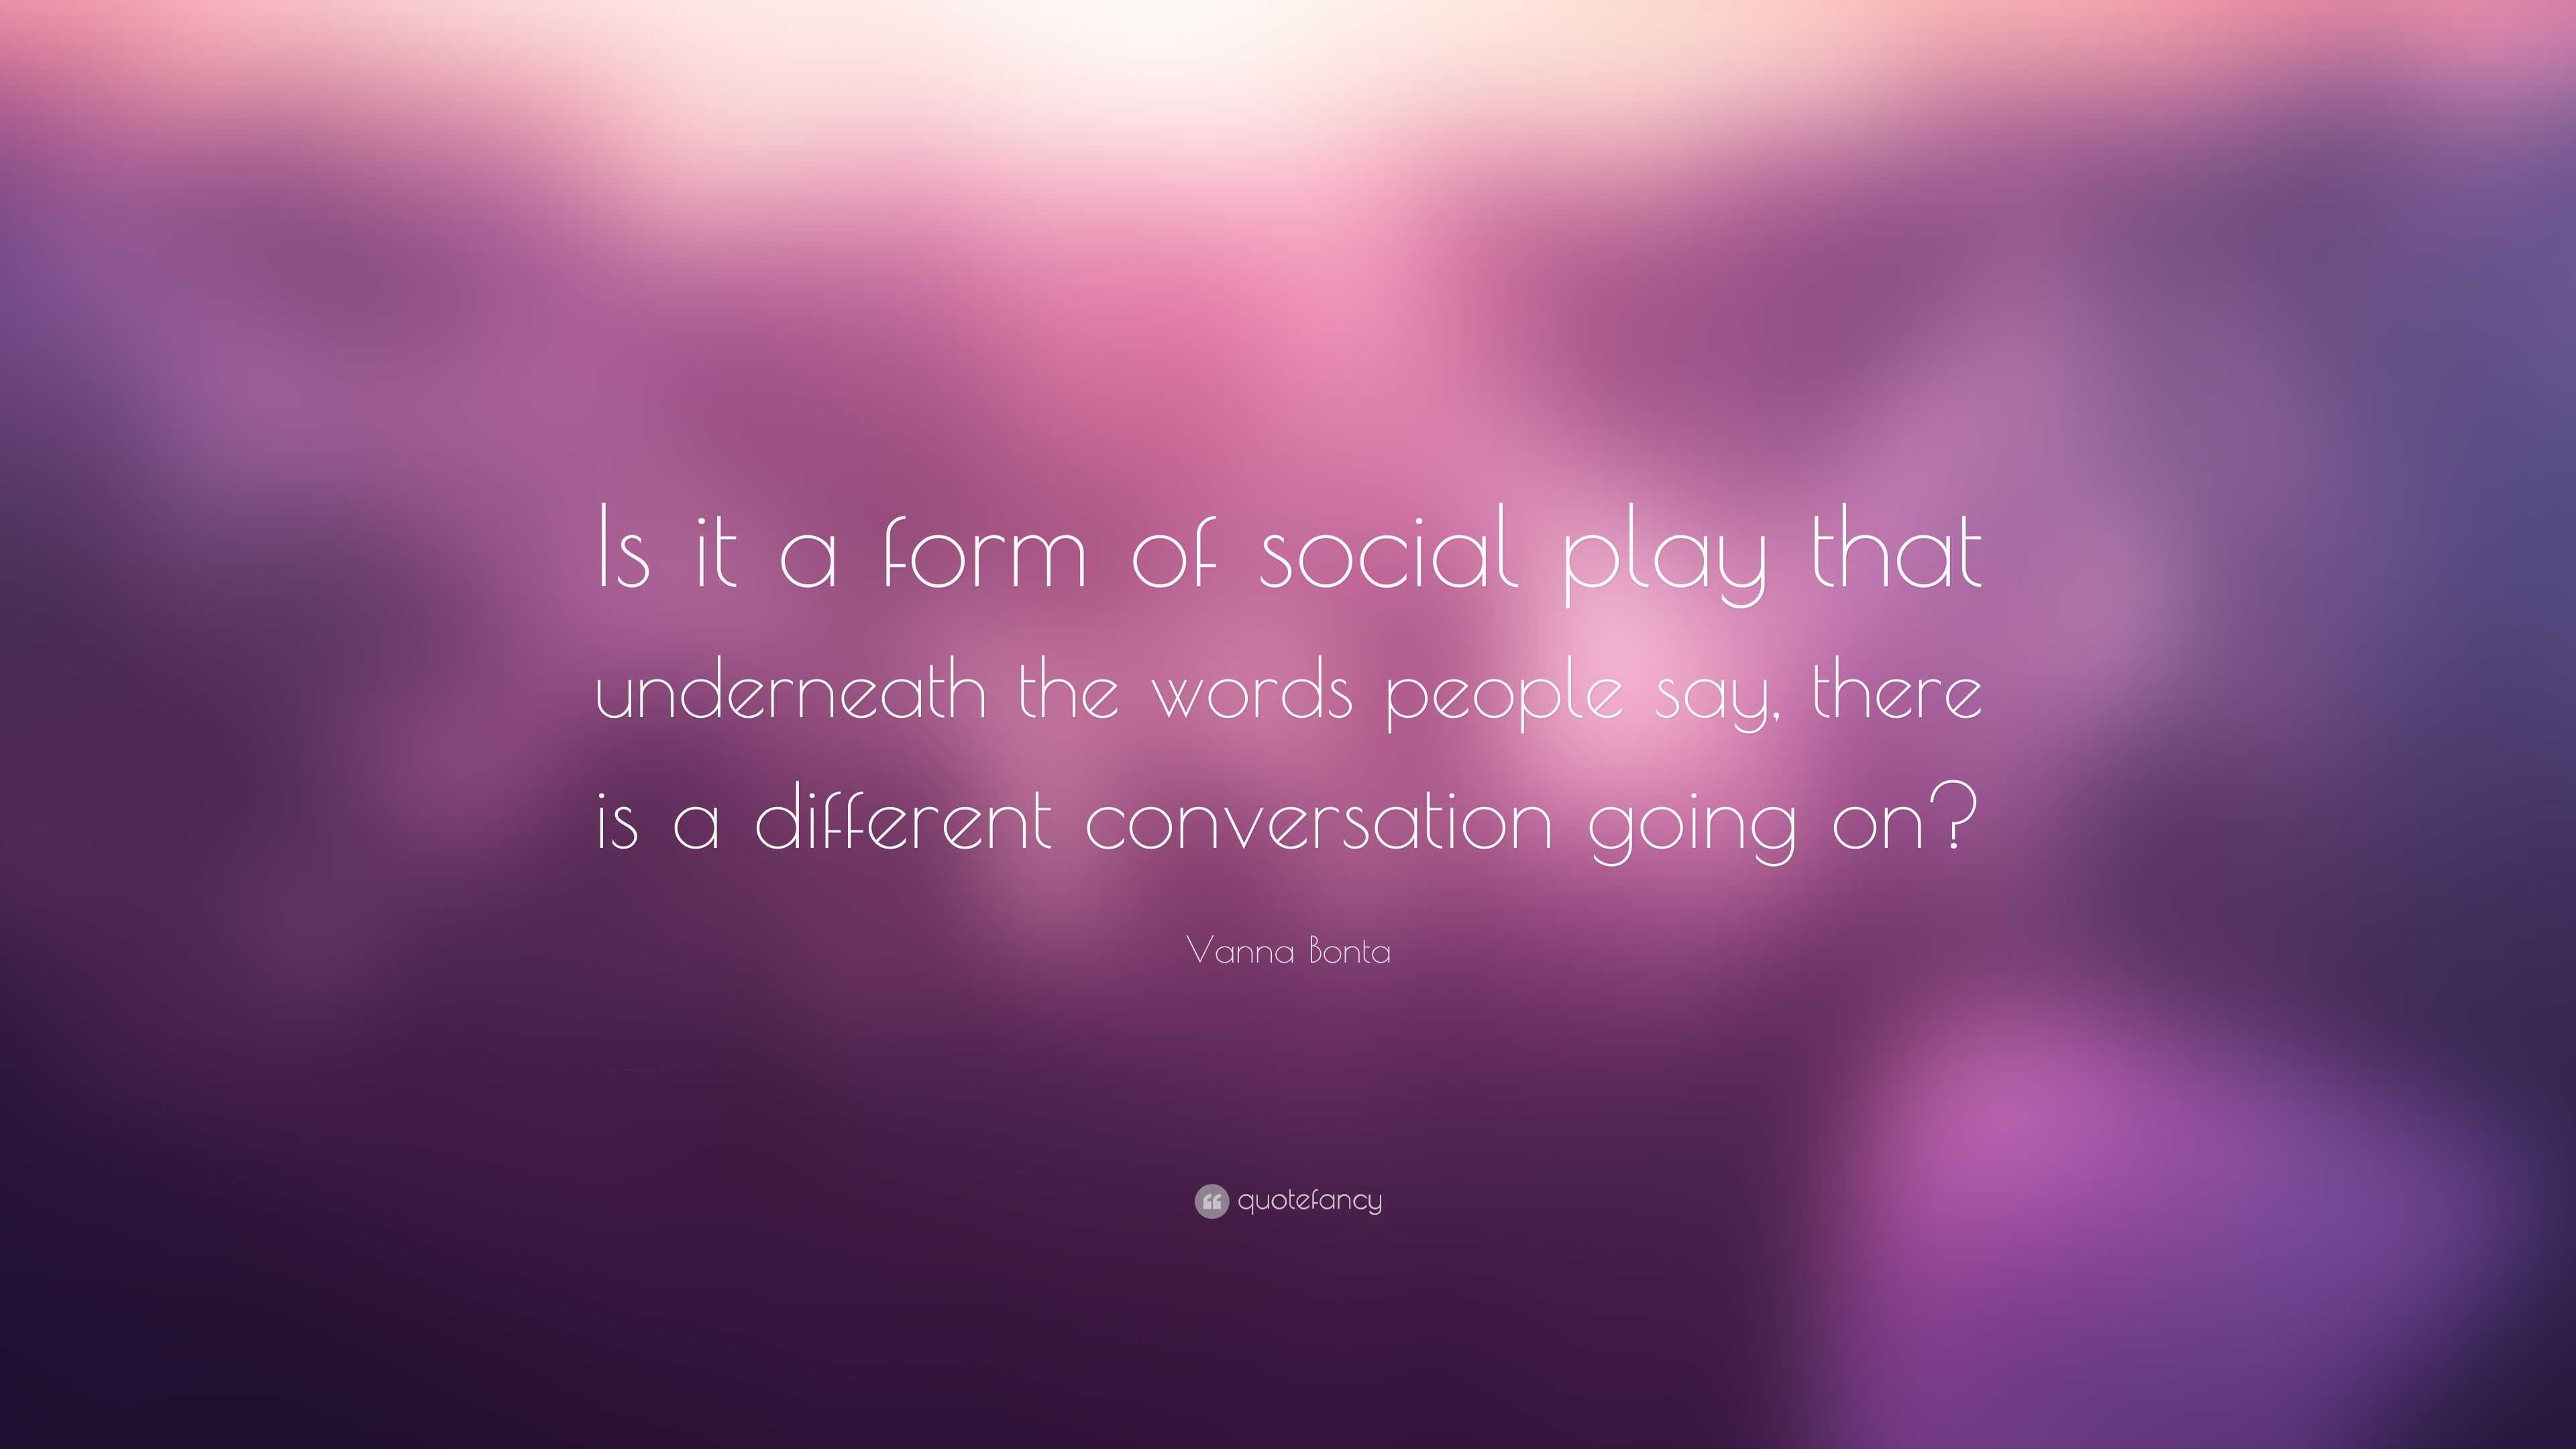 Vanna Bonta Quote “is It A Form Of Social Play That Underneath The